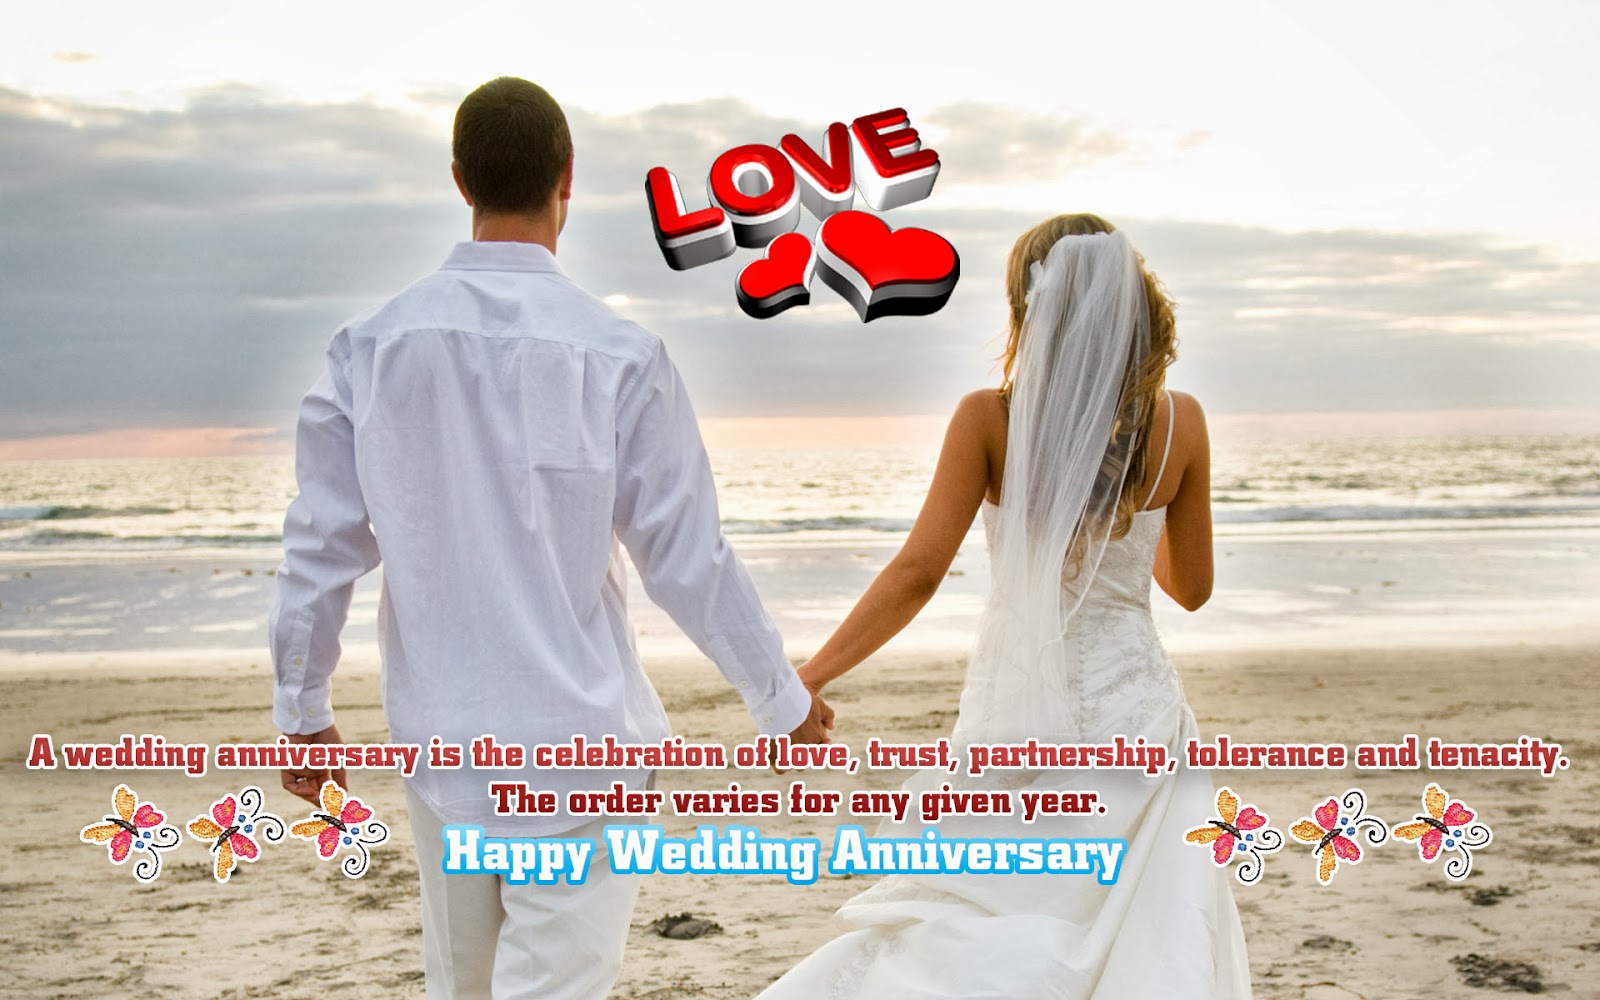 Best Happy Wedding Anniversary Wishes Images Messages - Wiki-How